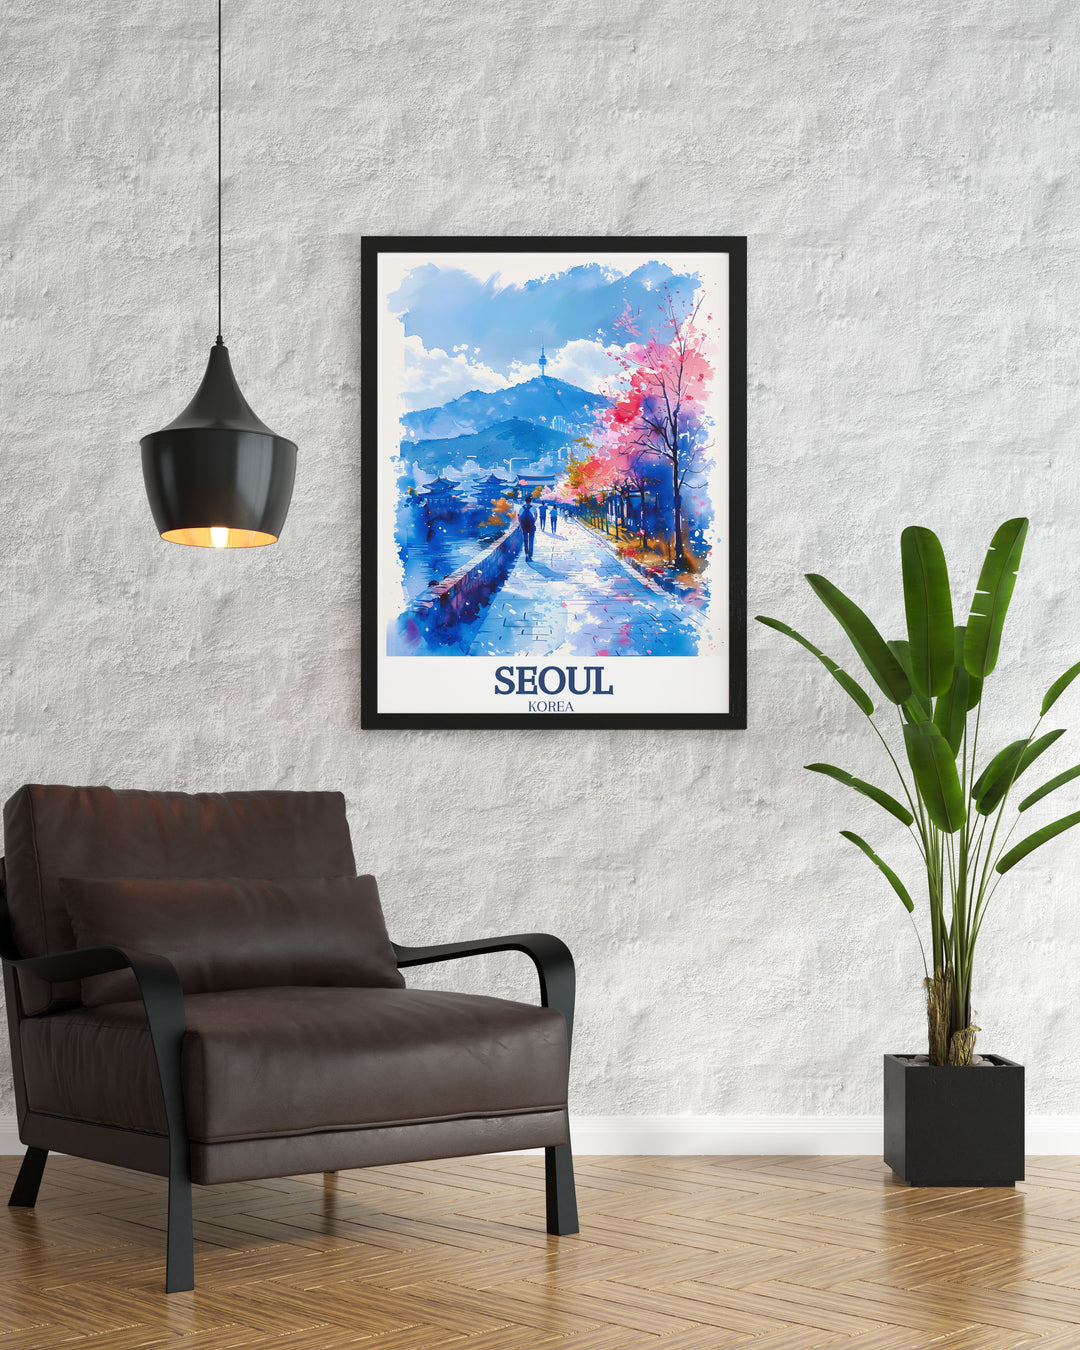 Captivating Seoul Artwork featuring N Seoul Tower and Bukchon Hanok Village perfect for home decor and gifts these prints highlight the best of South Korea combining vibrant colors with detailed craftsmanship